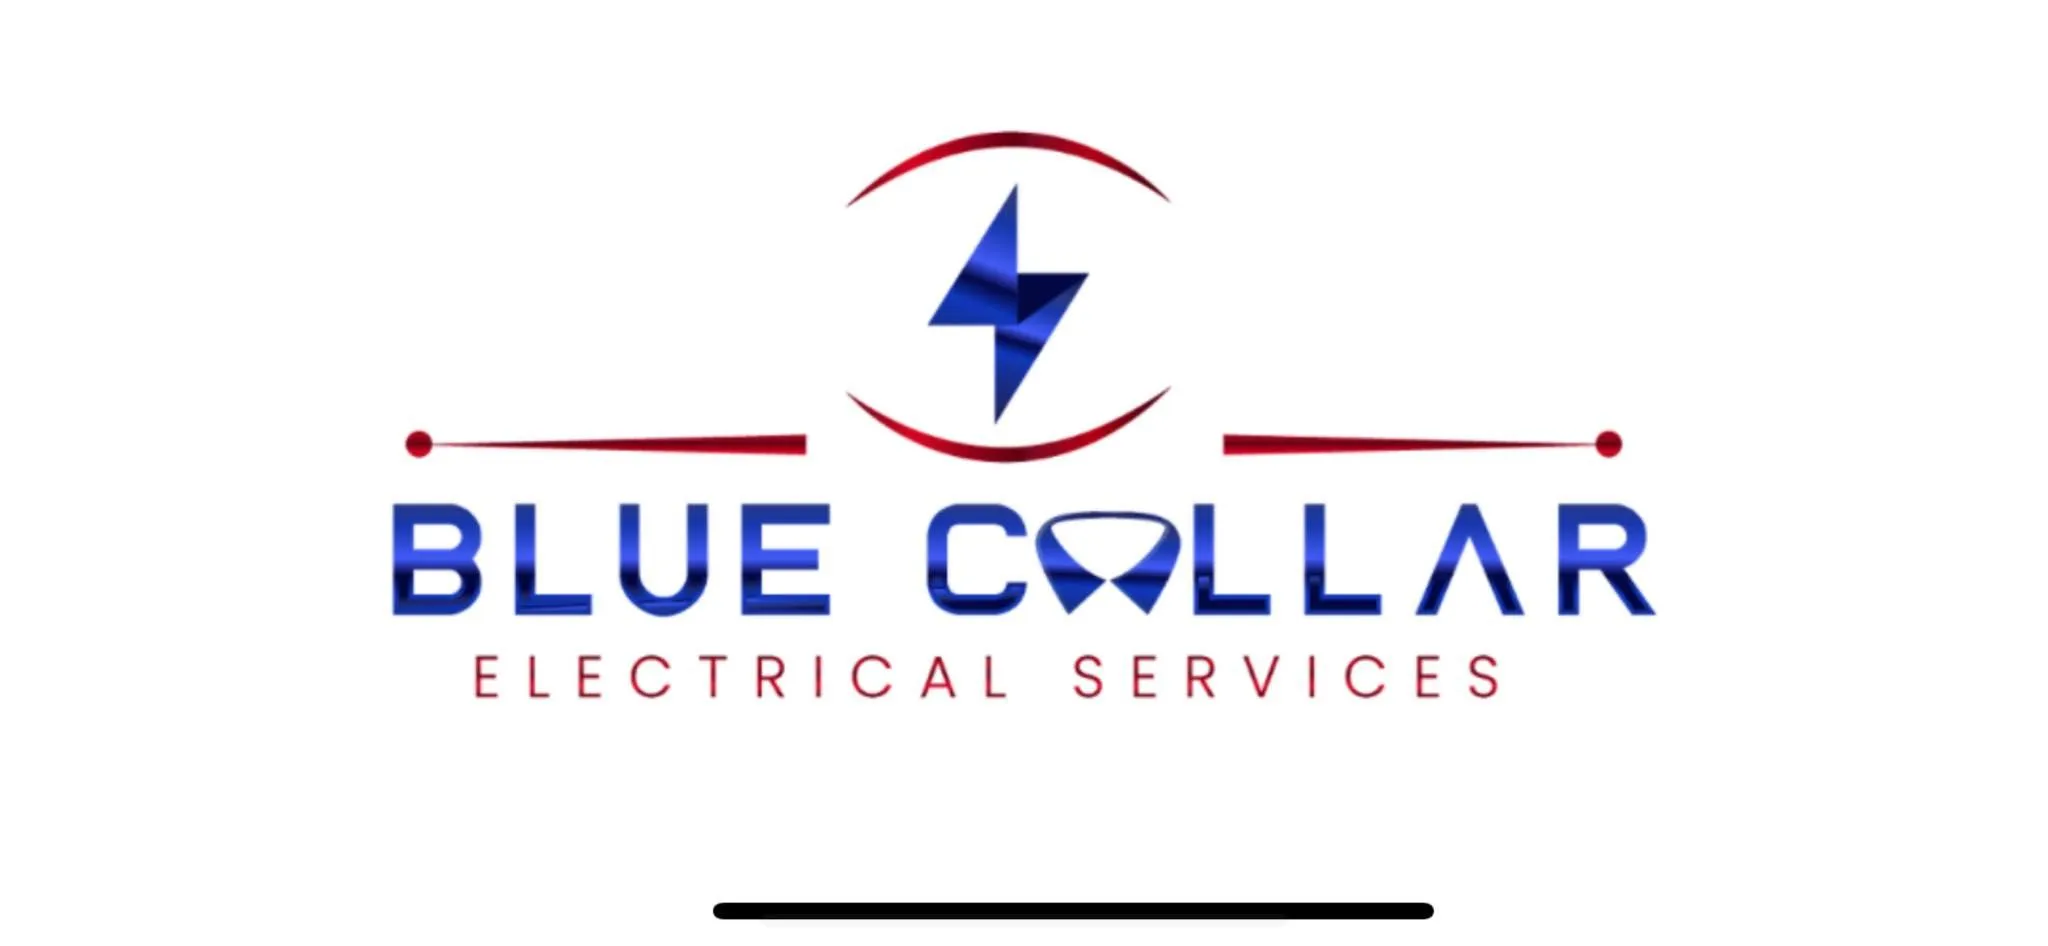 Circuit Breaker Installation and Repair for Blue Collar Electrical Services in Livermore, CA